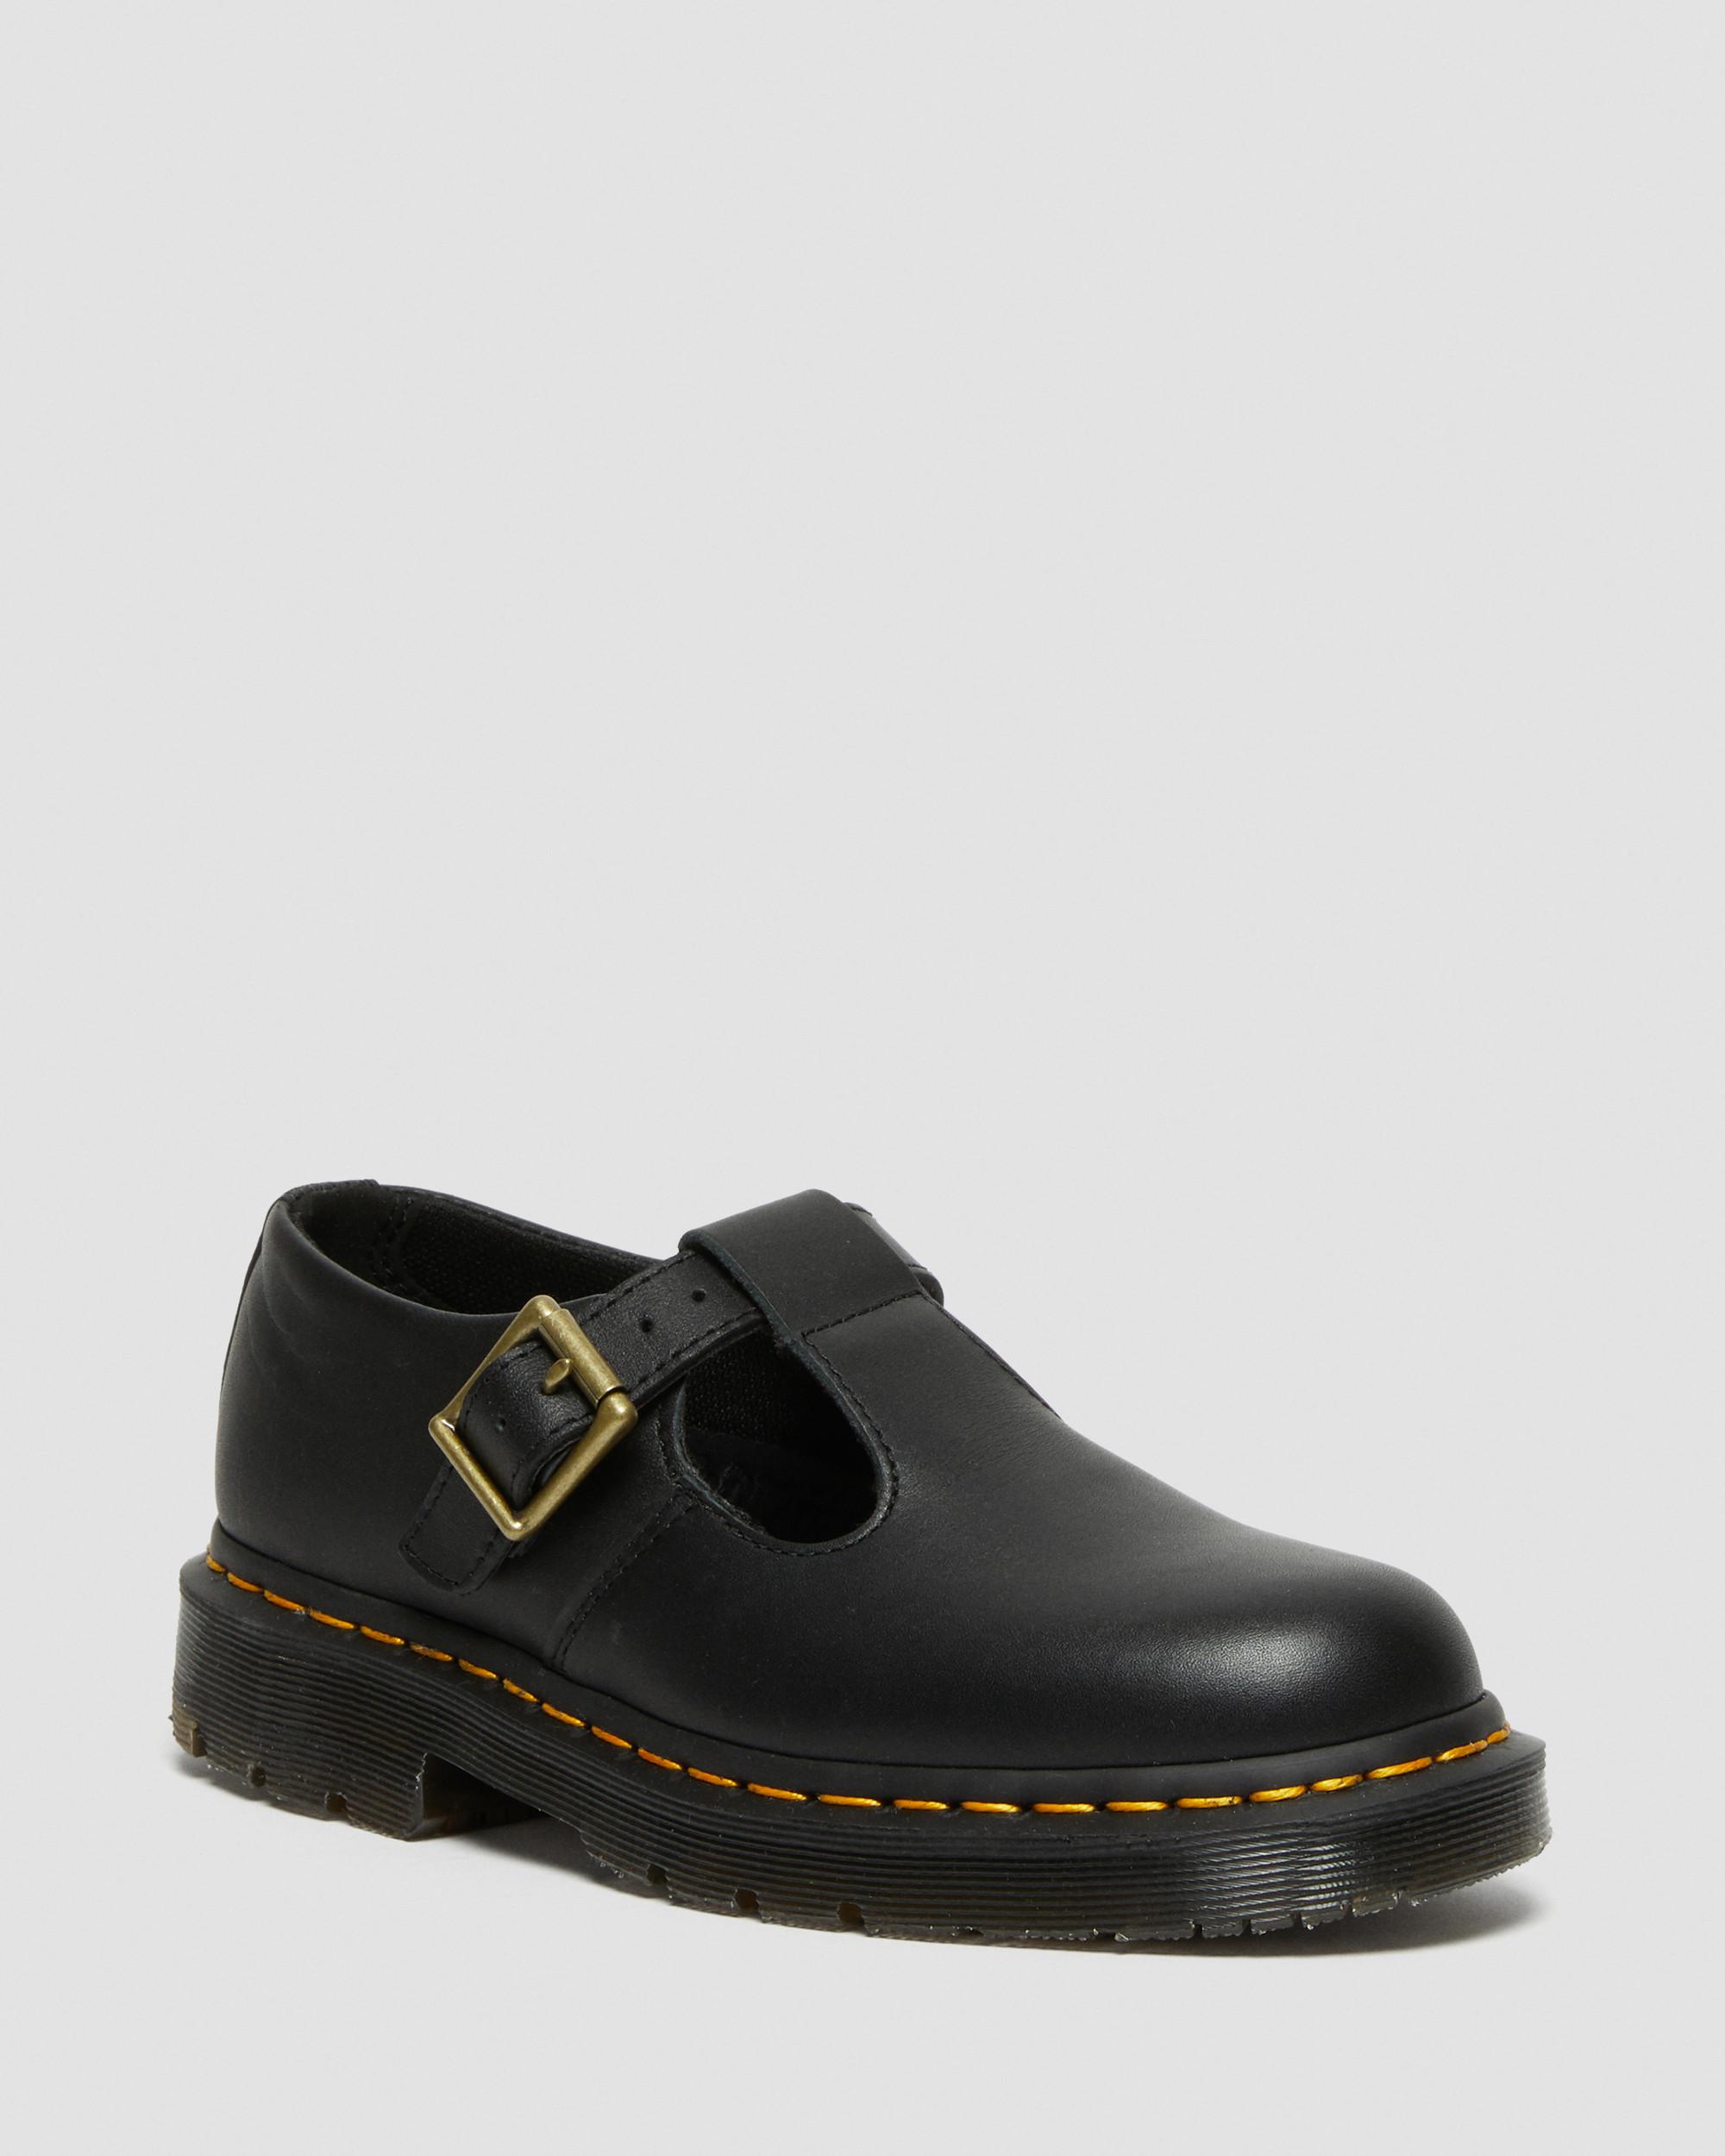 Polley Women's Slip Resistant Mary Jane Shoes in Black | Dr. Martens